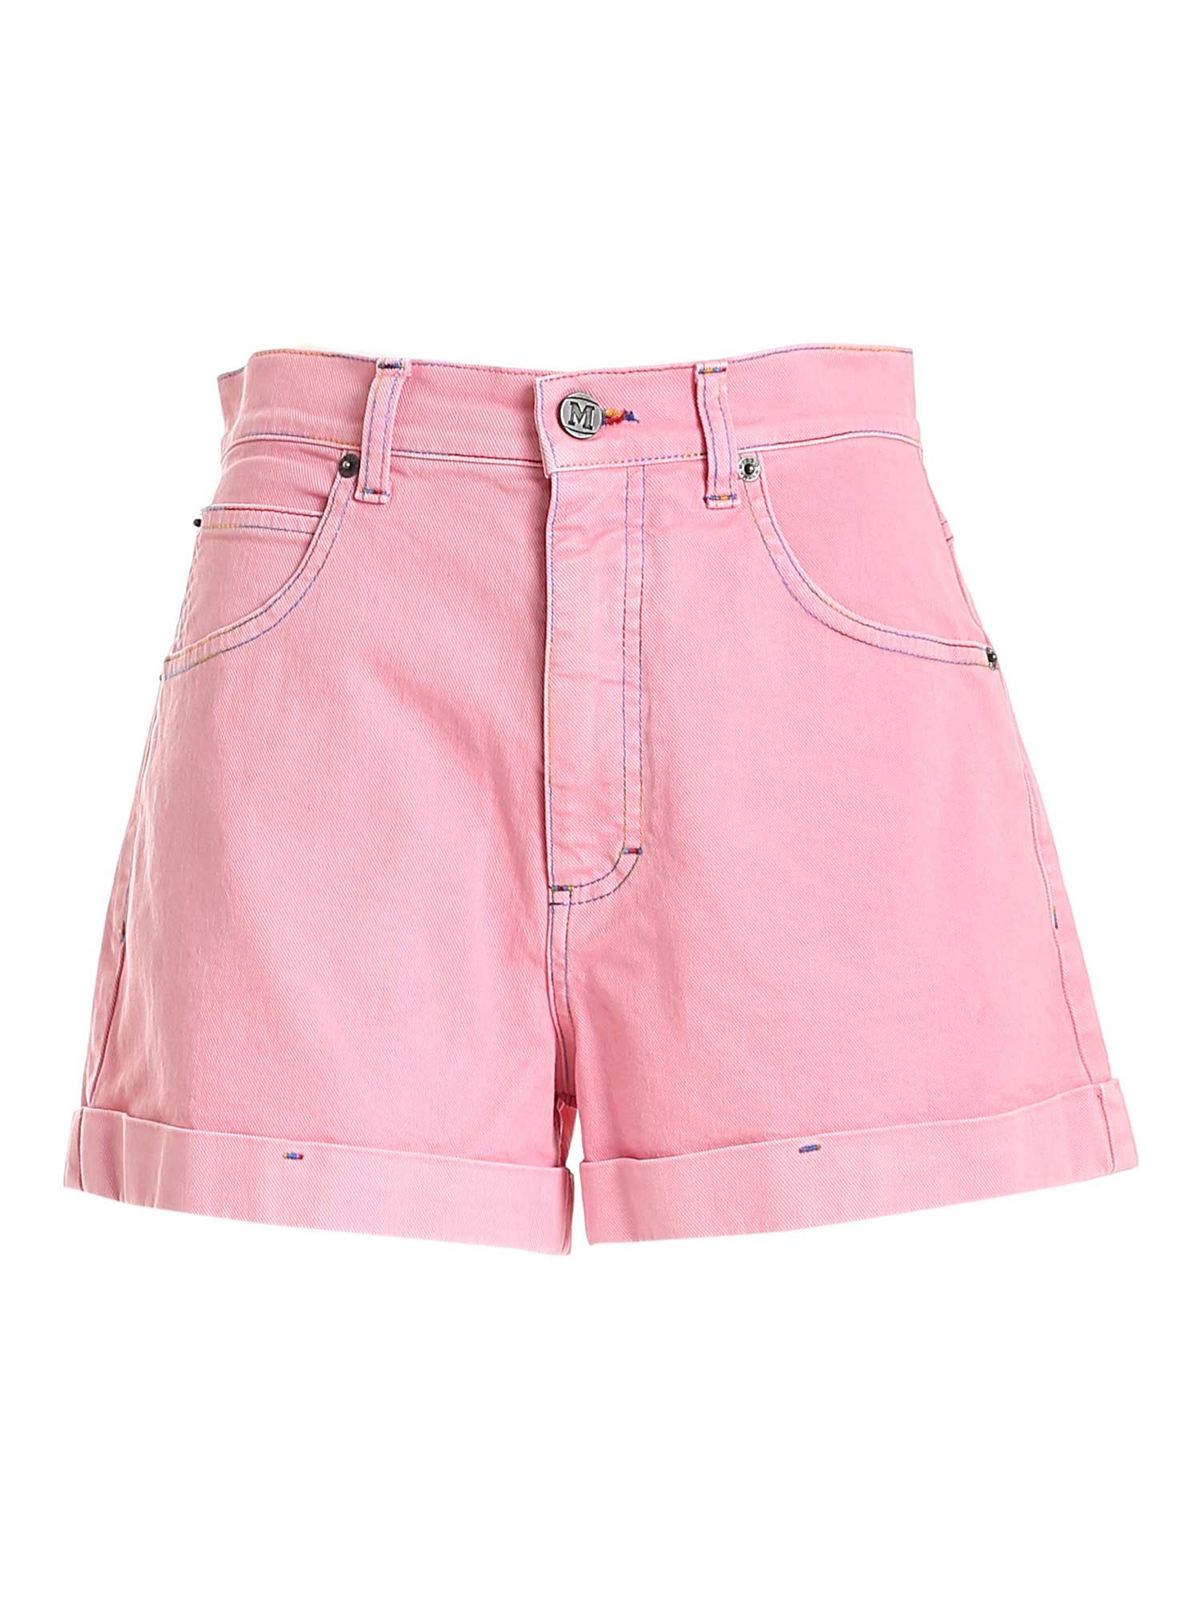 Missoni CONTRASTING STITCHING SHORTS IN PINK